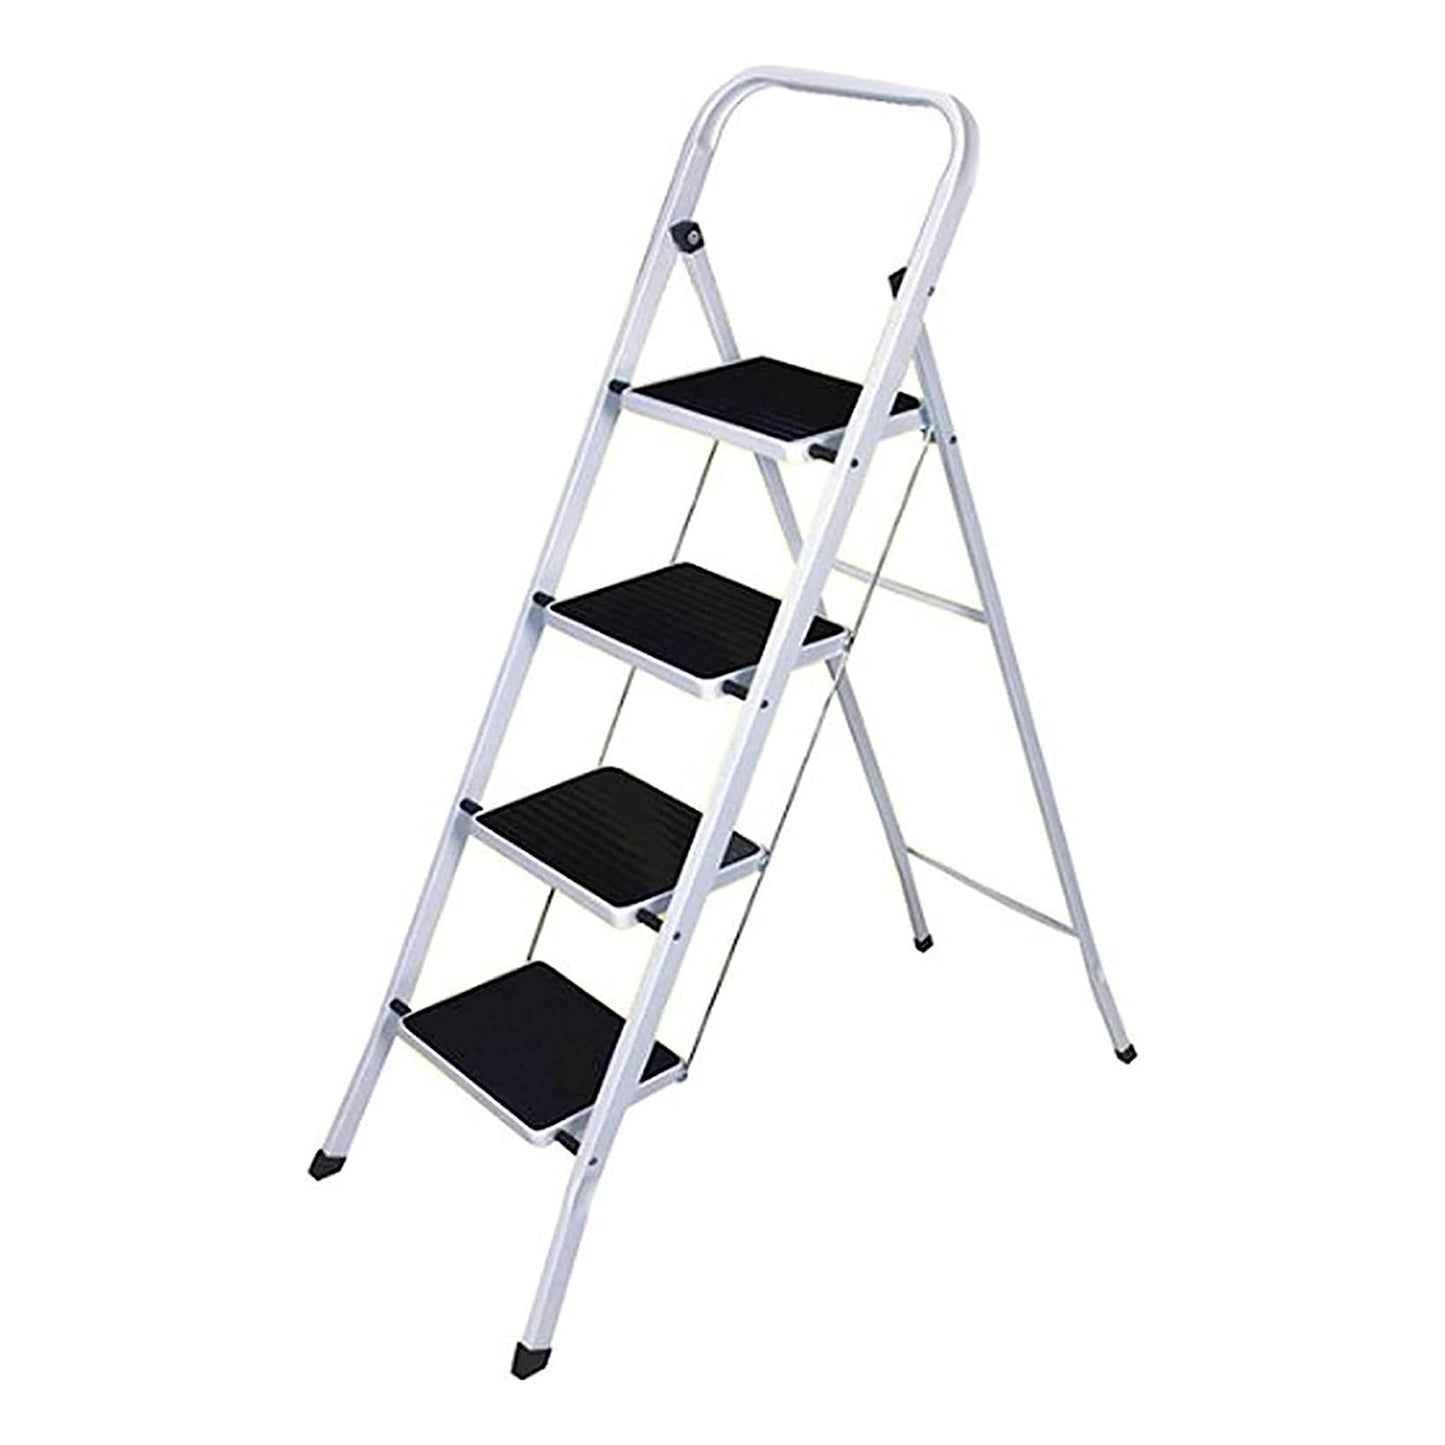 Portable Folding Step Ladders 2, 3 or 4 Steps Home Kitchen DIY Lightweight Strong Sturdy With Anti-Slip Safety Mat